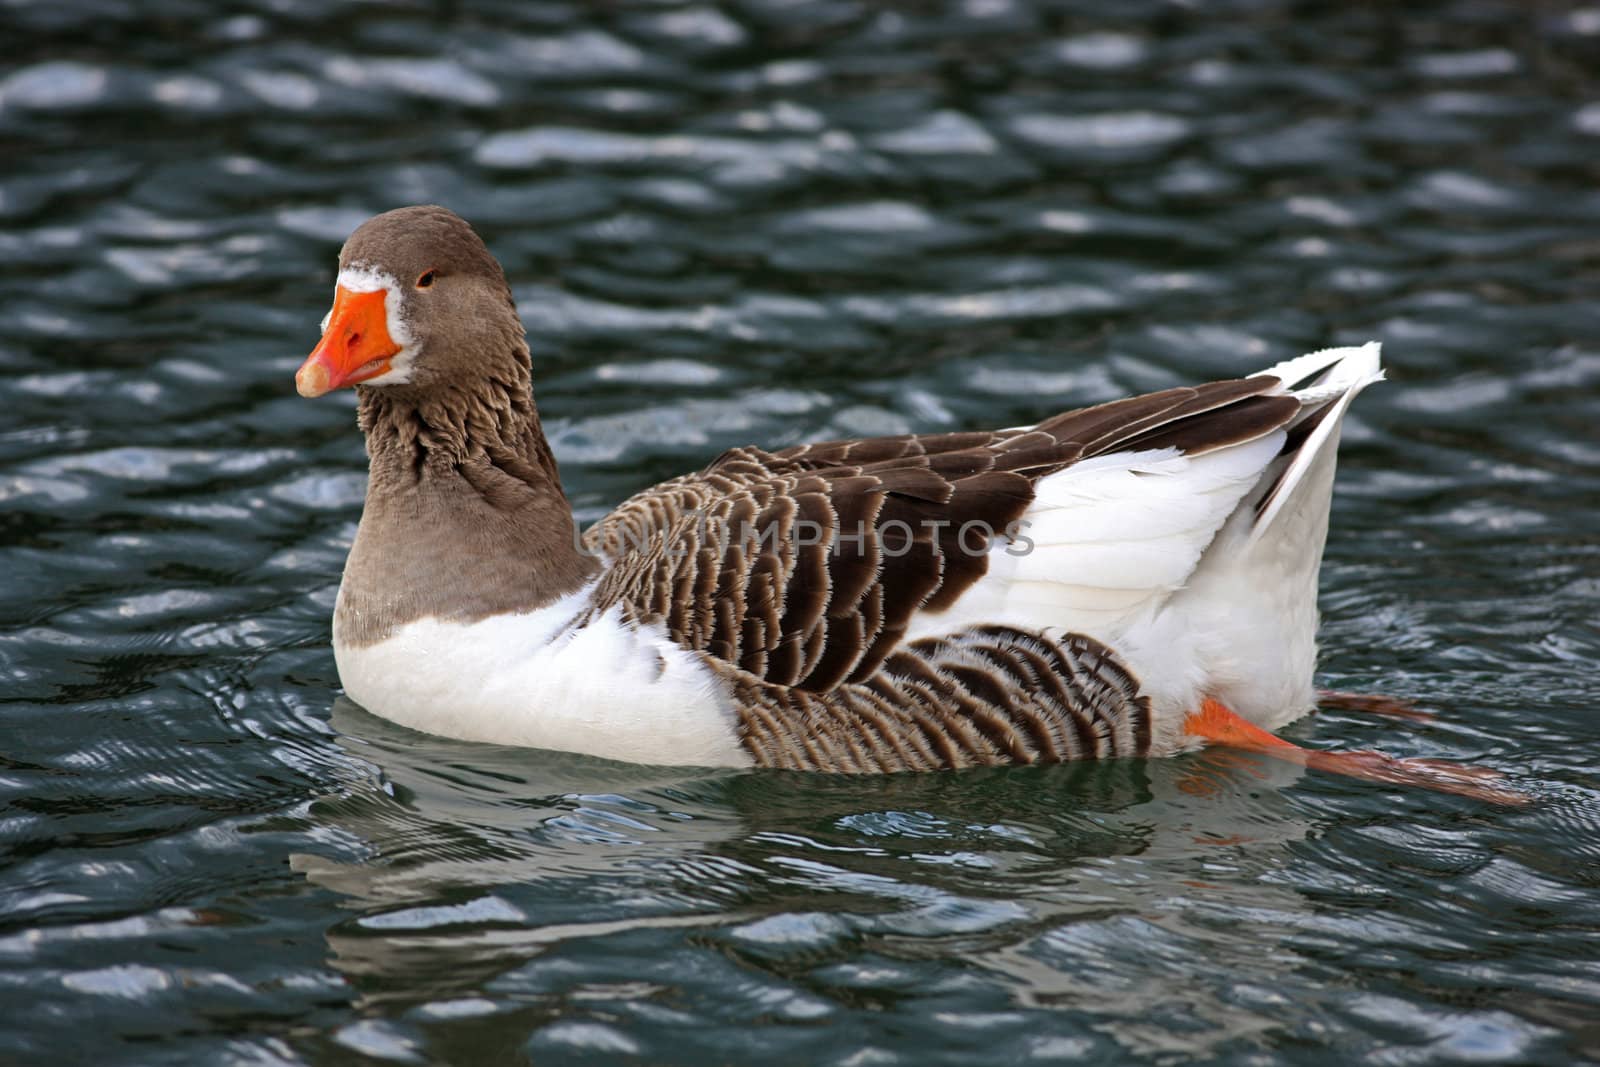 Colorful goose swimming alone in a lake